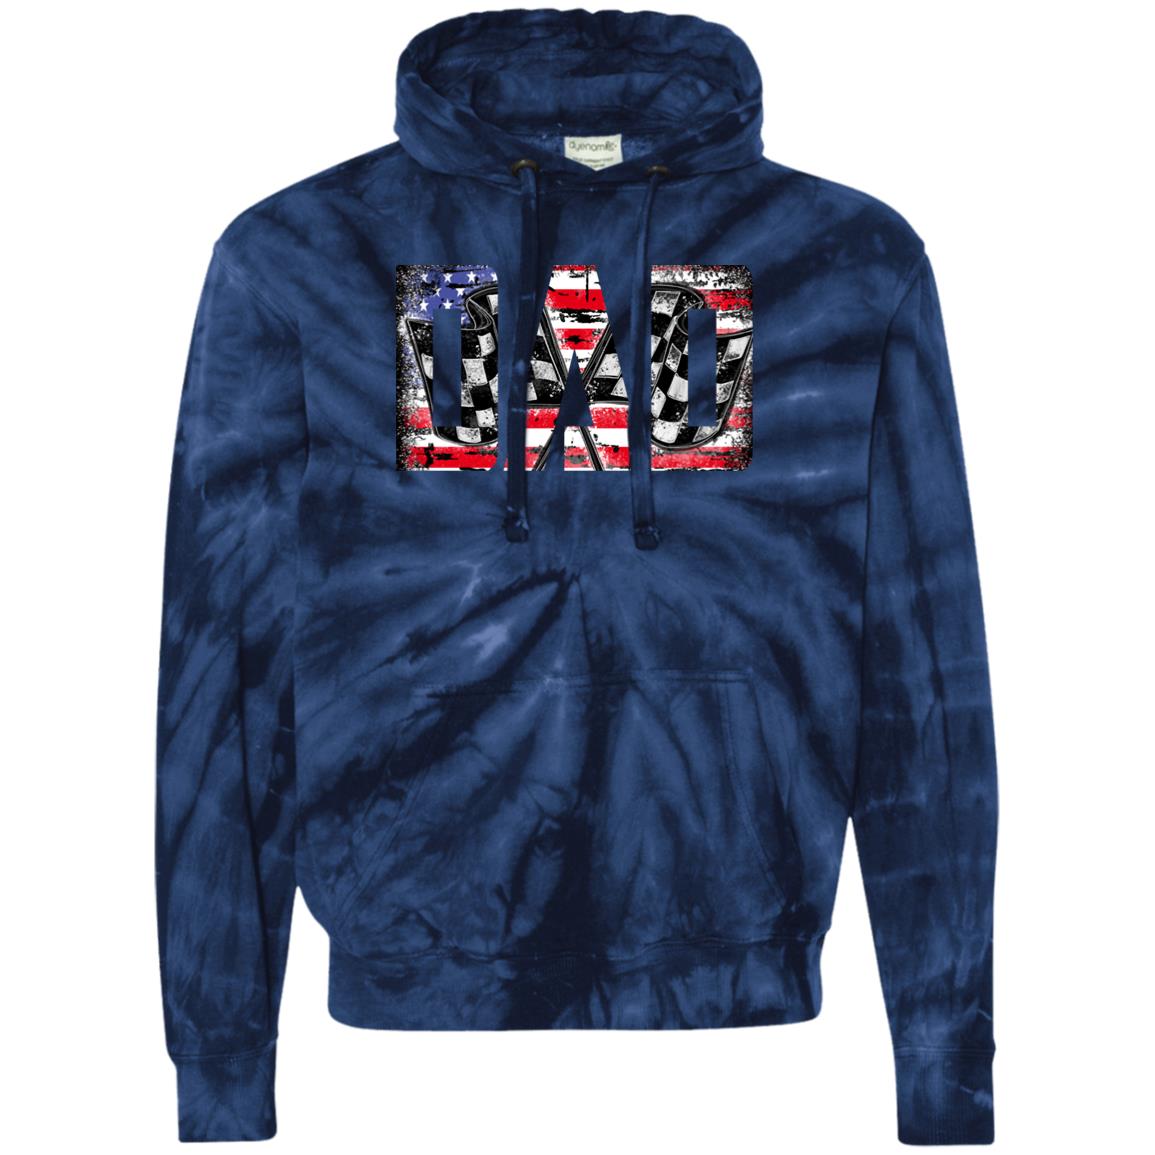 USA Racing Dad Unisex Tie-Dyed Pullover Hoodie